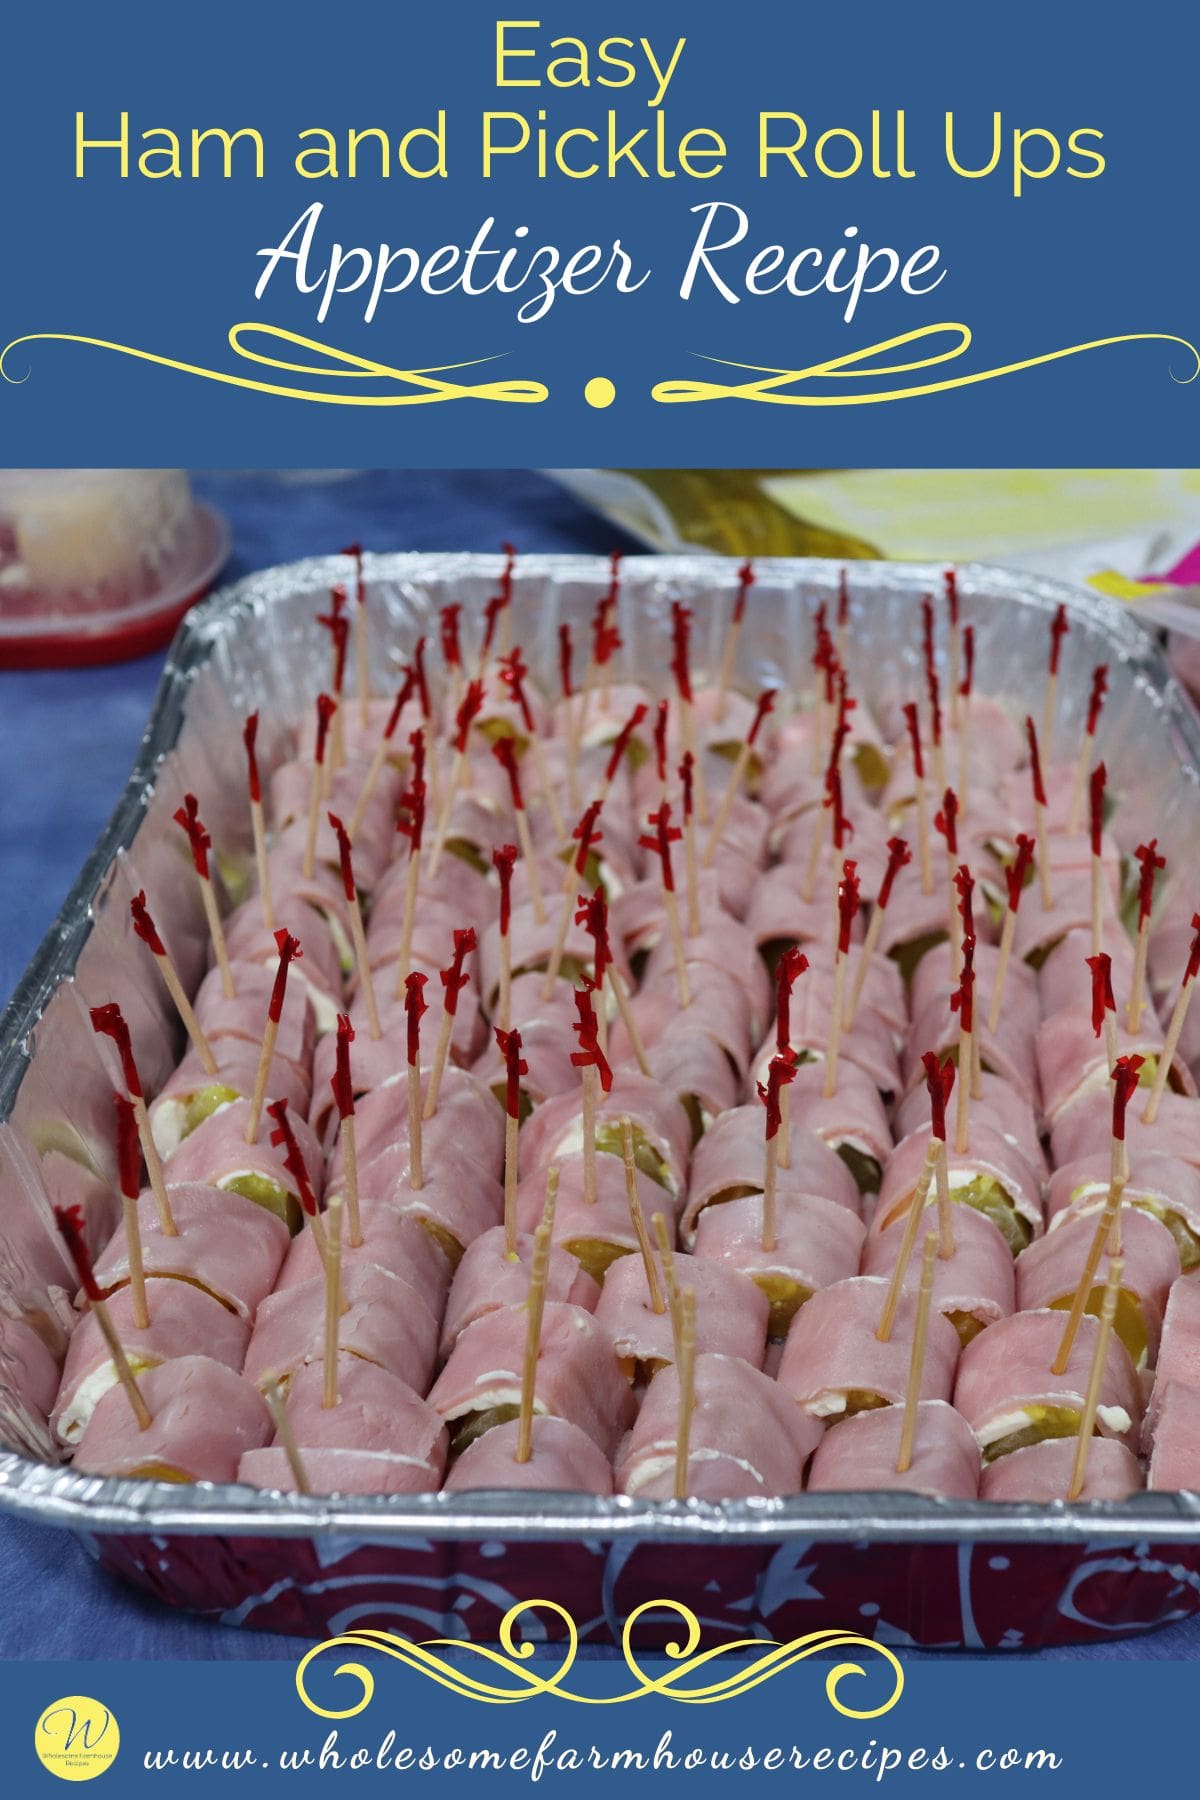 Easy Ham and Pickle Roll Ups Appetizer Recipe